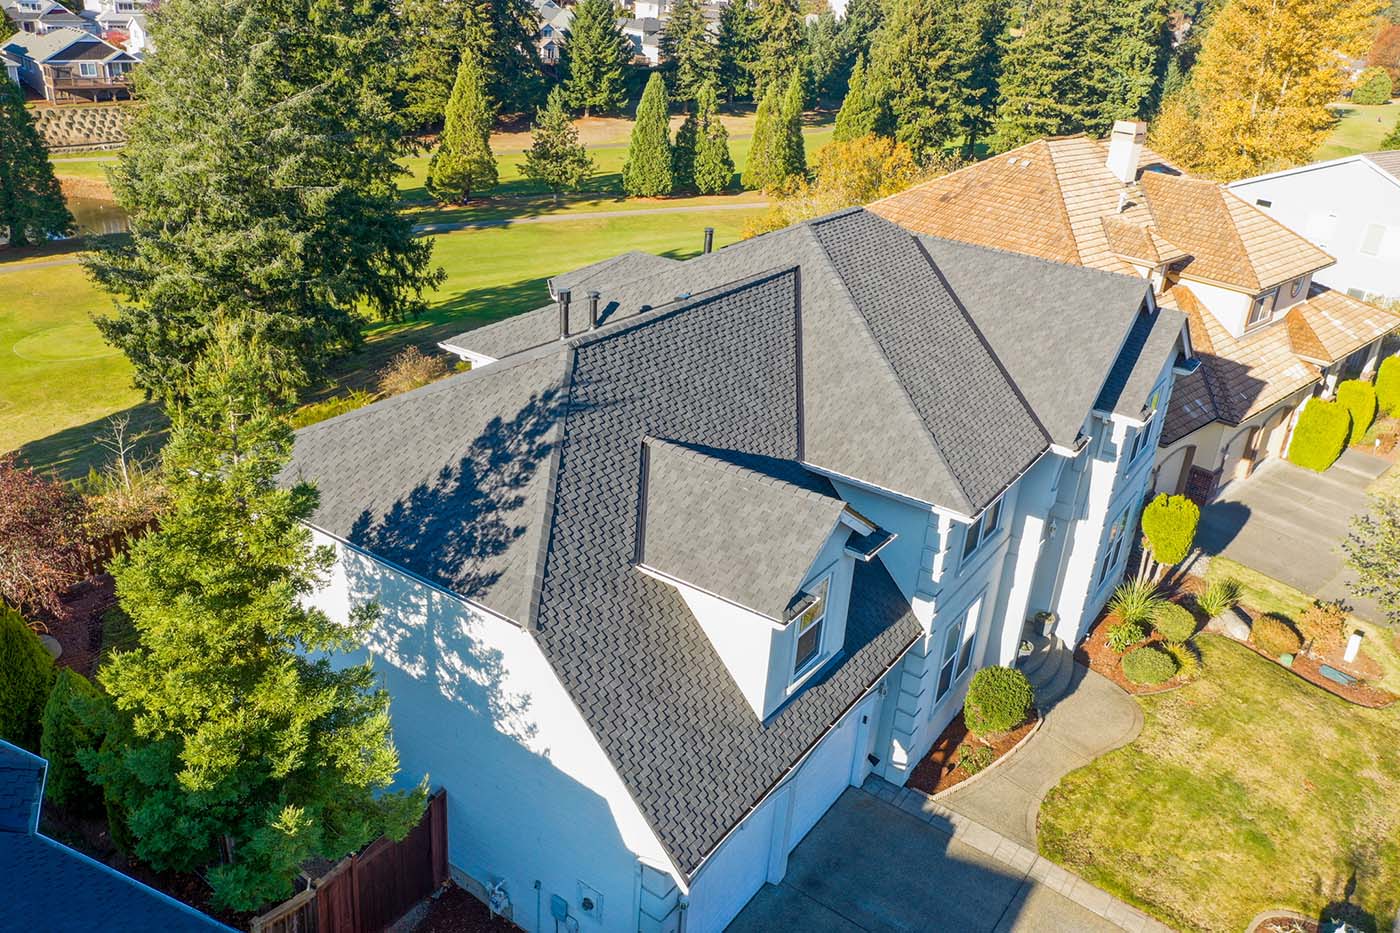 New Composite Asphalt Shingle Roof with Stucco in Tacoma, Washington - view of roof from an angle